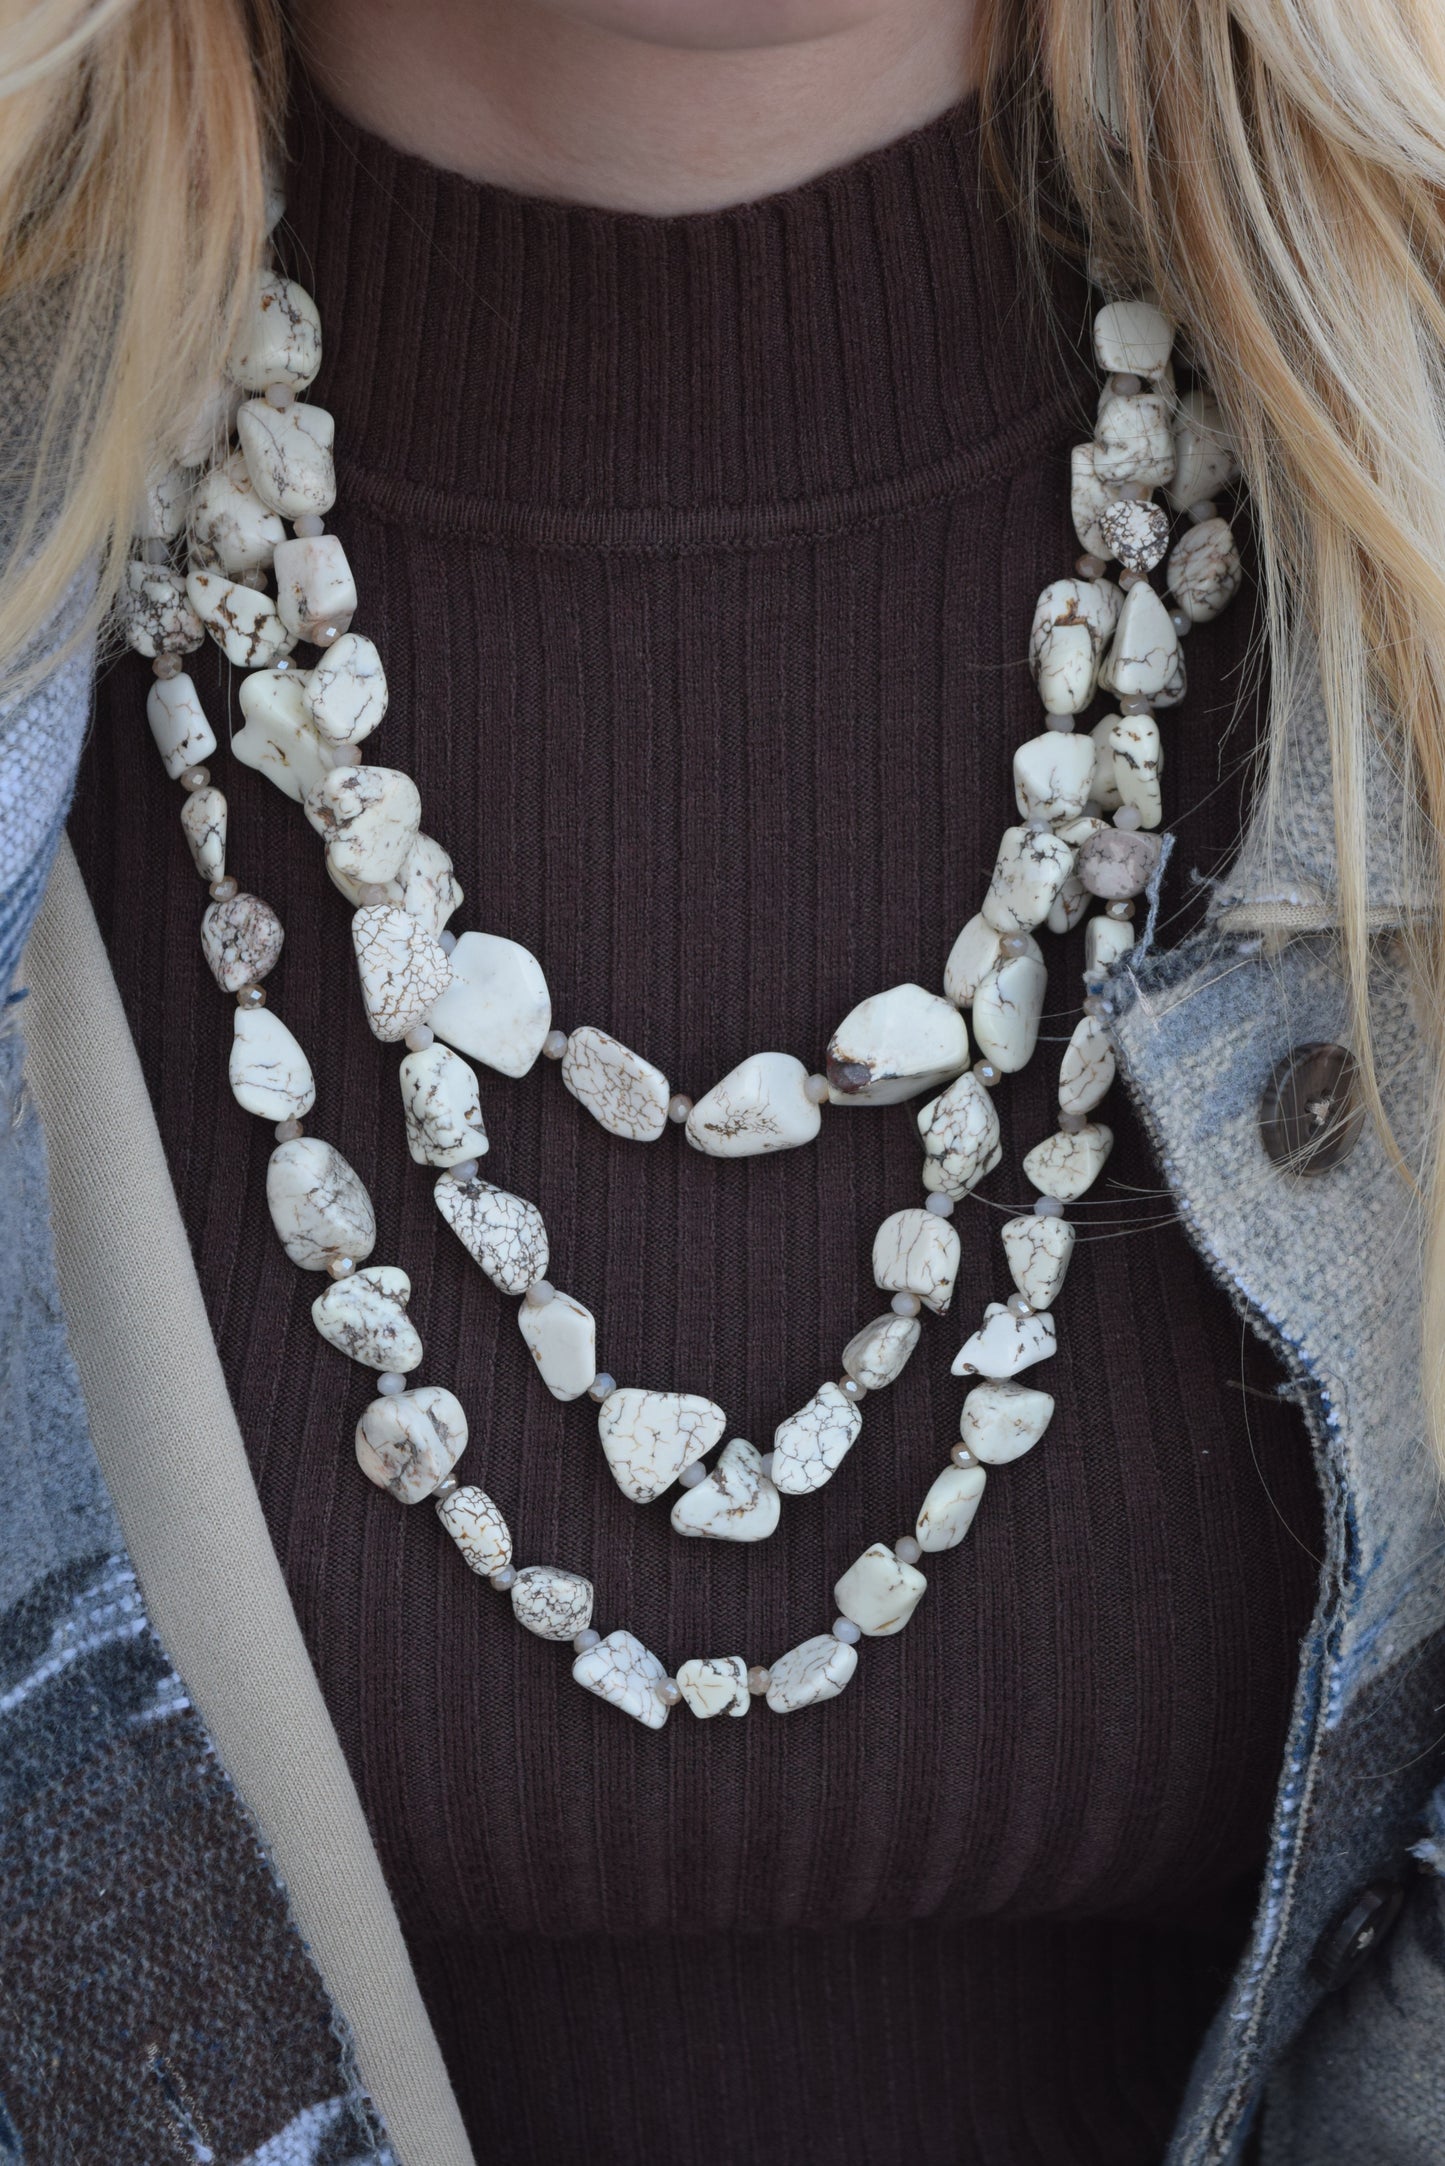 The Sandstone Rock Stacked Necklace